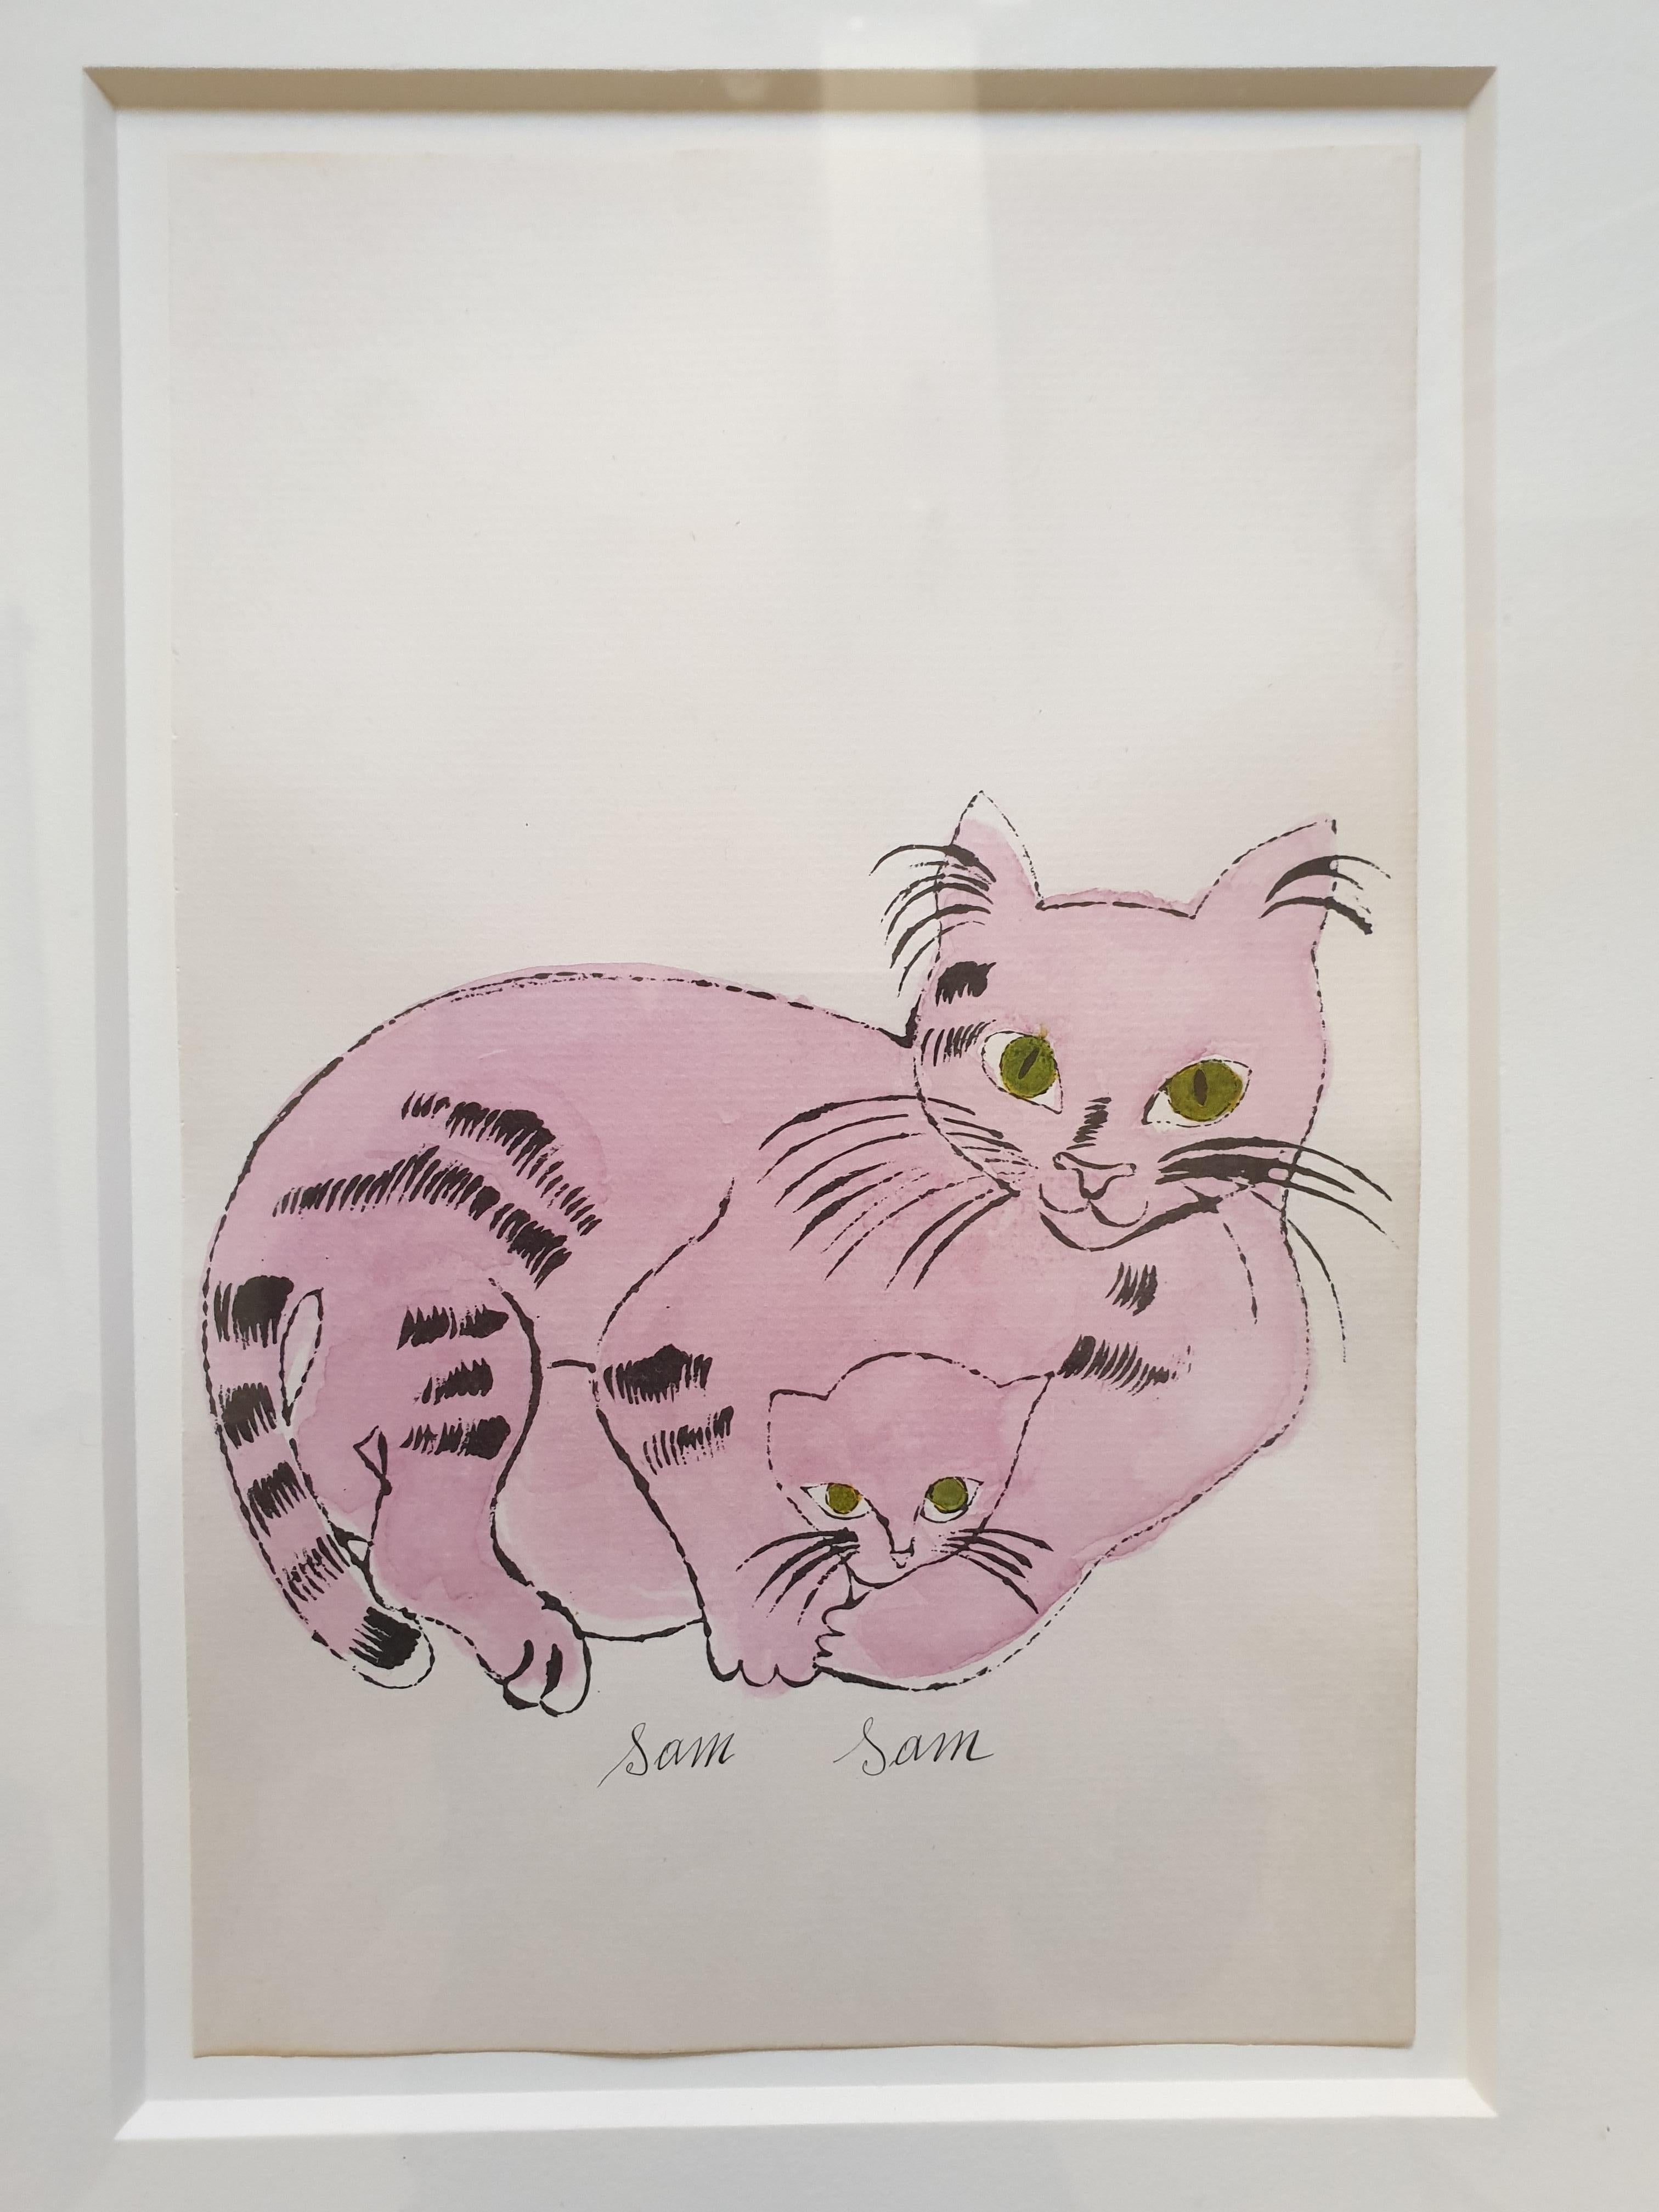 Pink 'Sam Sam' from 25 Cats... Hand-Coloured lithograph with signed frontispiece - Art by Andy Warhol